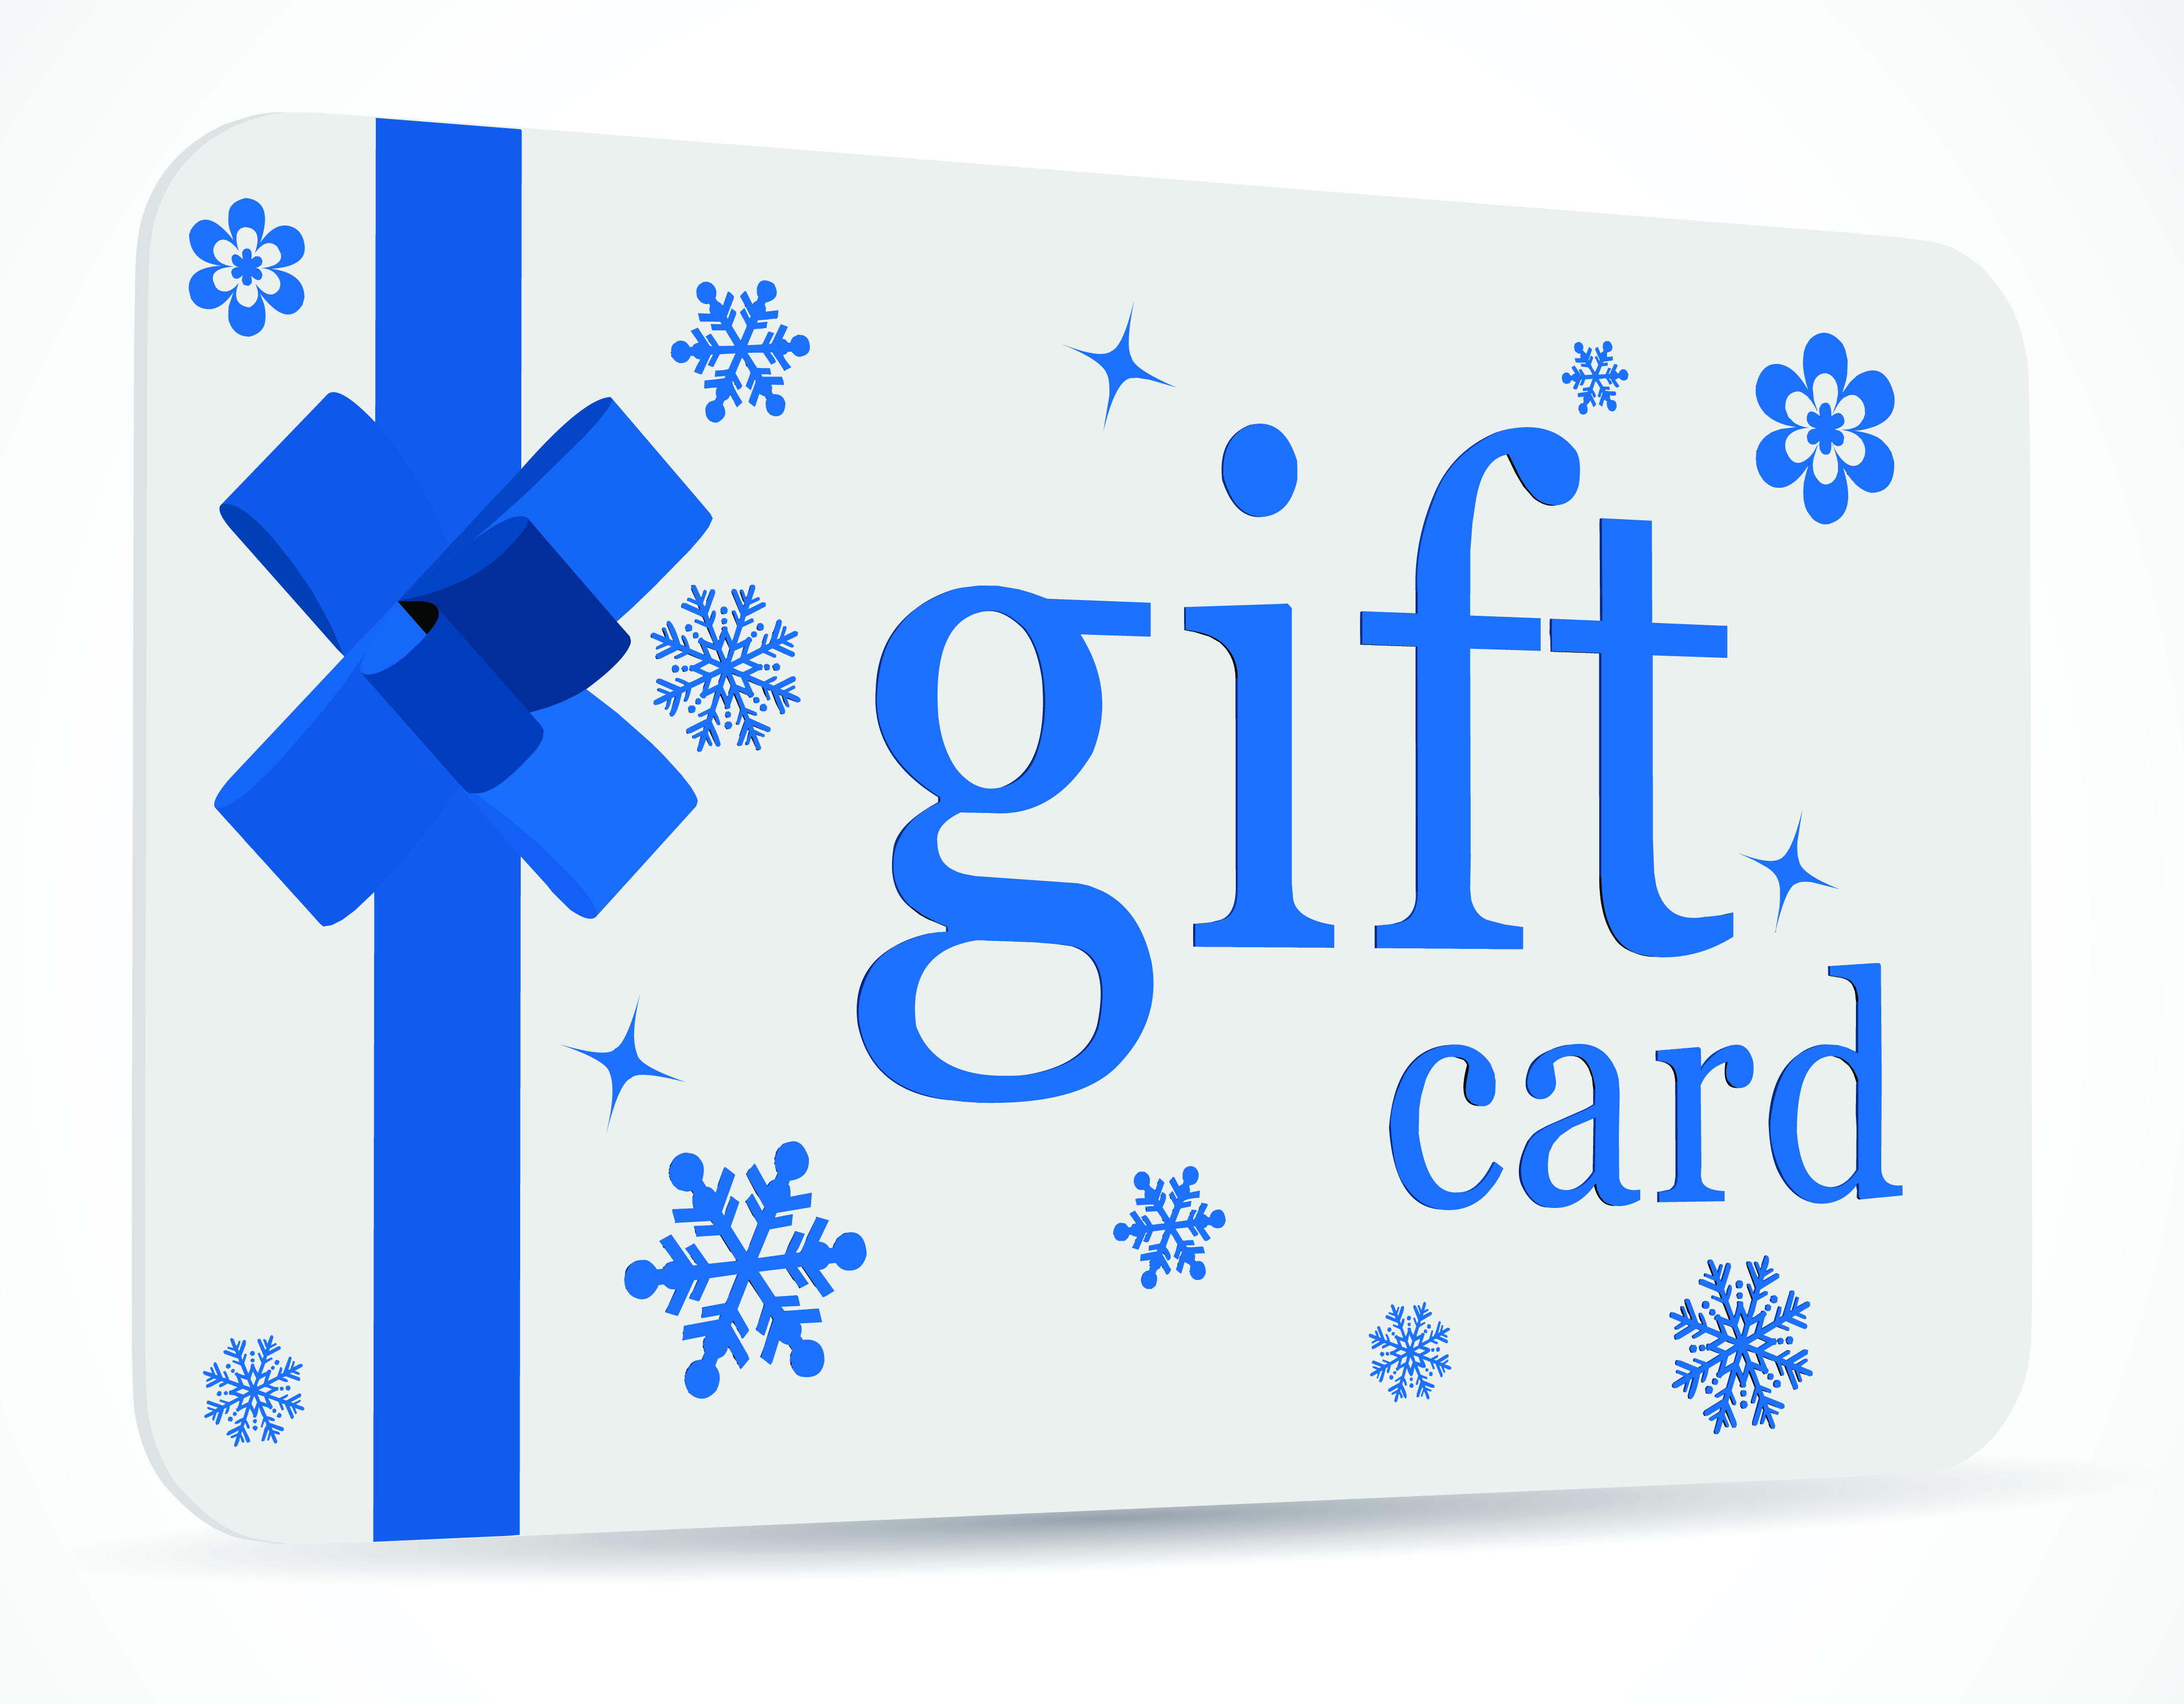 Holiday Gift Cards Now Made Simple & Affordable within GiftLogic POS